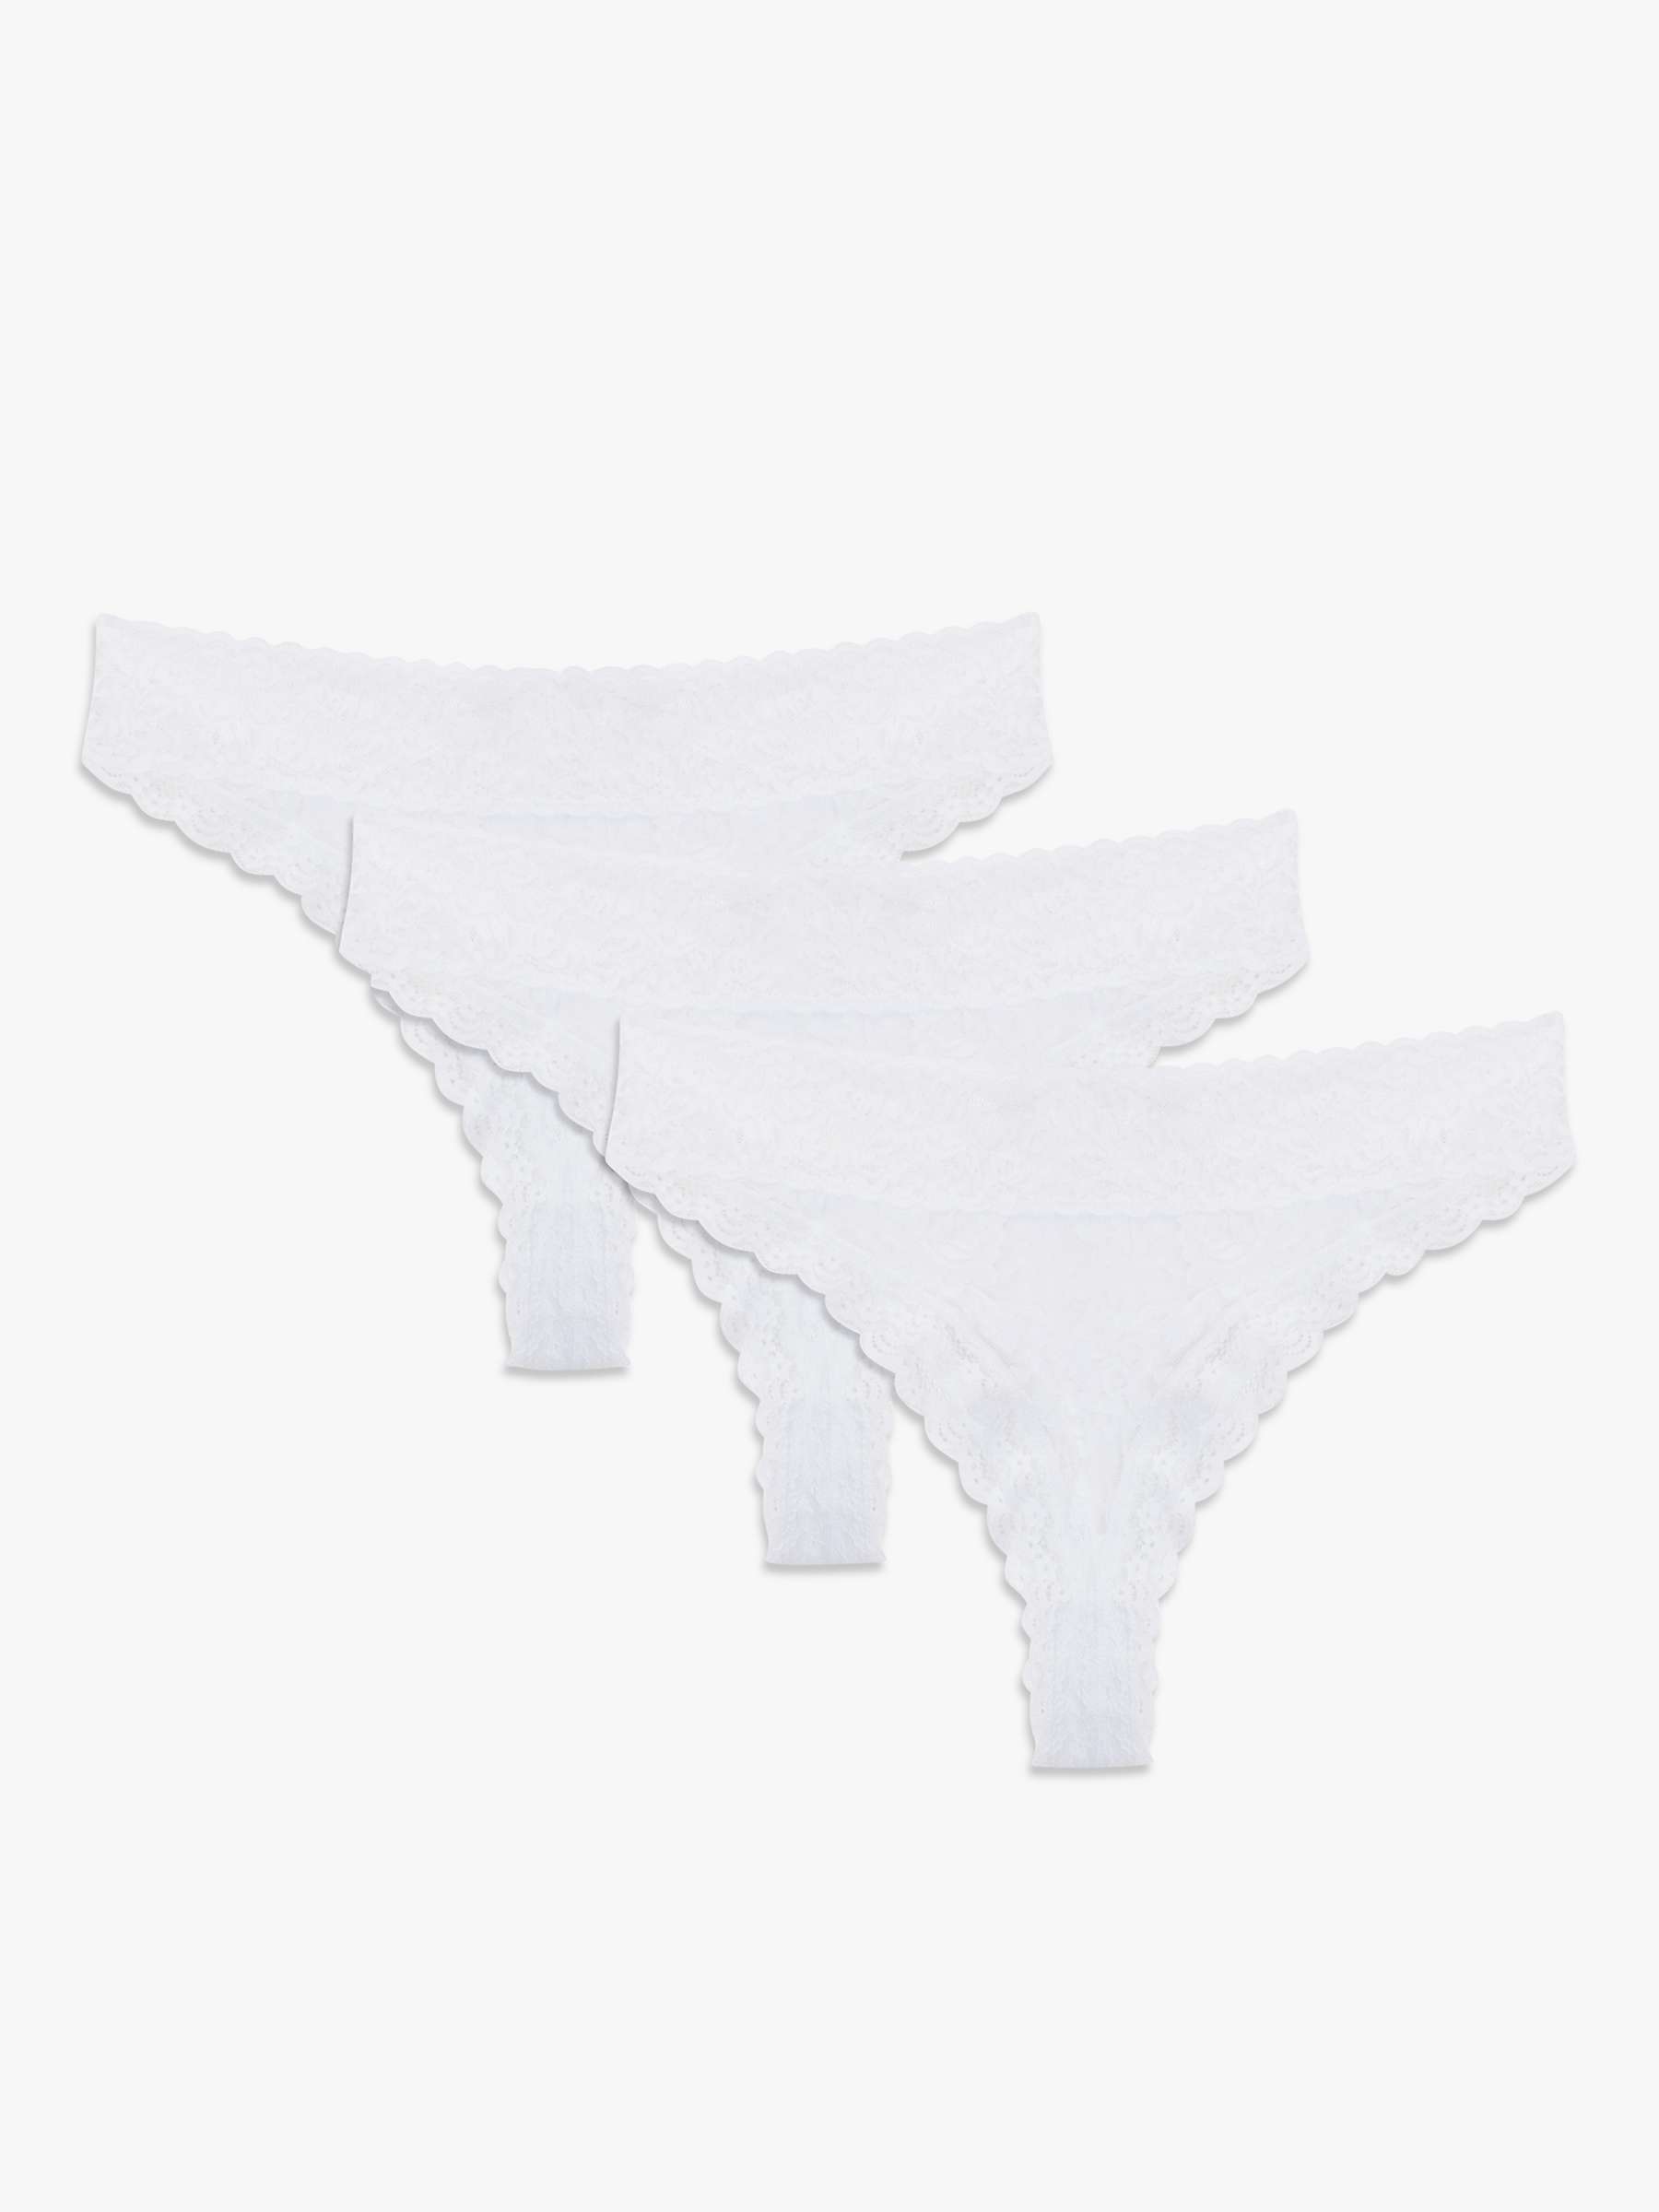 Buy John Lewis ANYDAY Helenca Lace Brazilian Knickers, Pack of 3 Online at johnlewis.com